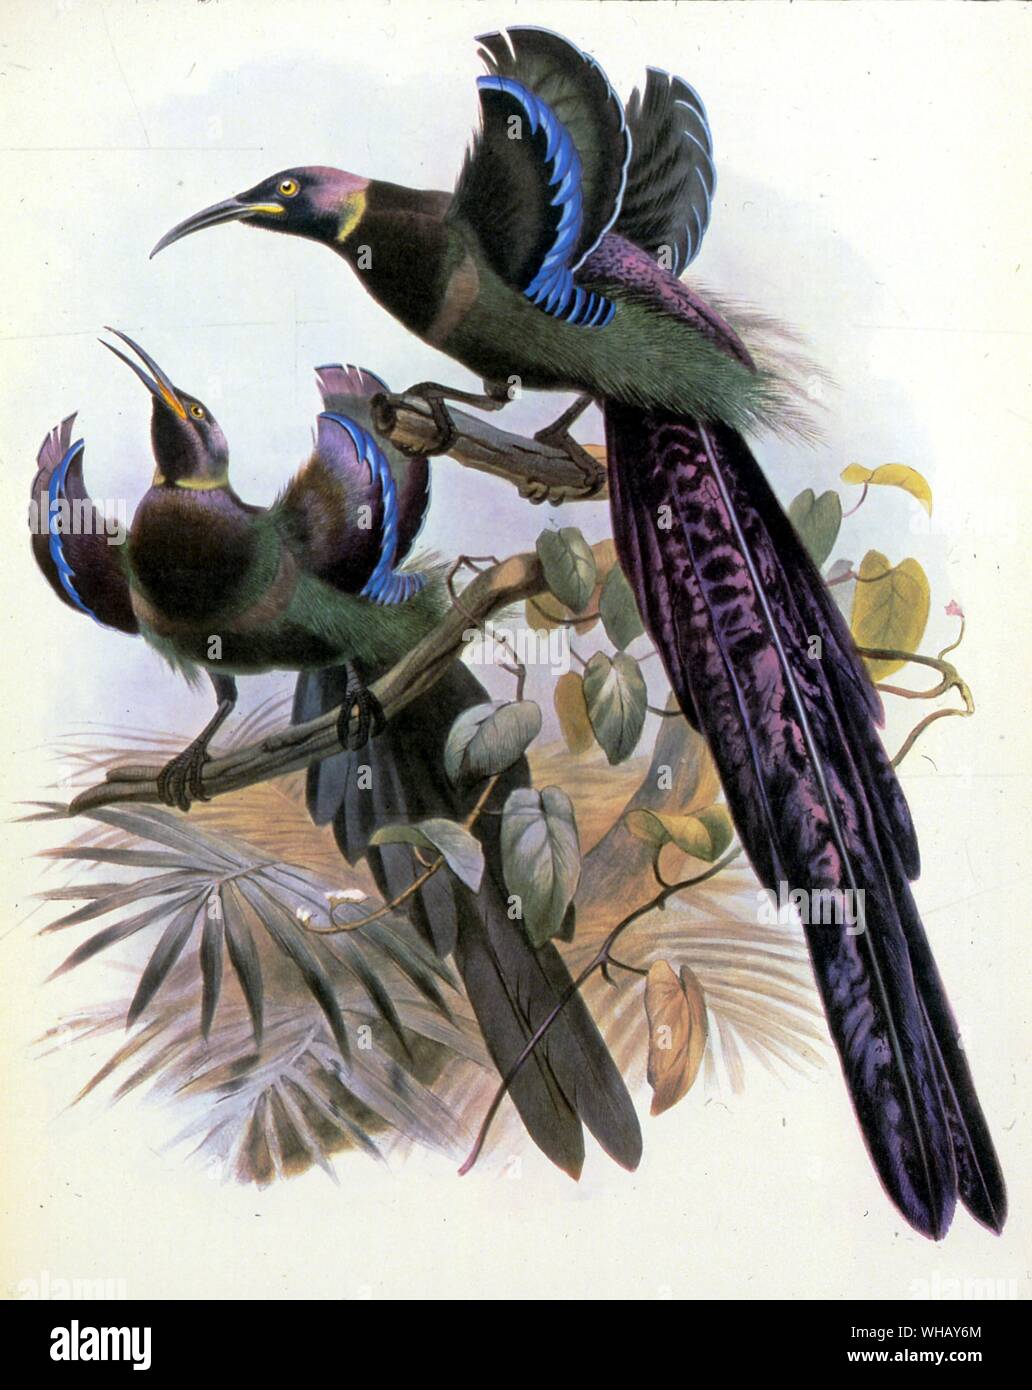 Daniel Giraud Elliot's (1835 -1915) Bird of Paradise (Epimachus ellioti). Extinct Birds by Errol Fuller page 238. A study of the world's recently extinct bird species with colour and black and white illustrations.. Daniel Giraud Elliot was an American zoologist. He was one of the founders of the American Museum of Natural History in New York and the American Ornithologists' Union.. Elliot used his wealth to publish a series of colour-plate books on birds and animals. The books included A Monograph of the Phasianidae (Family of the Pheasants) (1870-72), A Monograph of the Paradiseidae or Birds Stock Photo